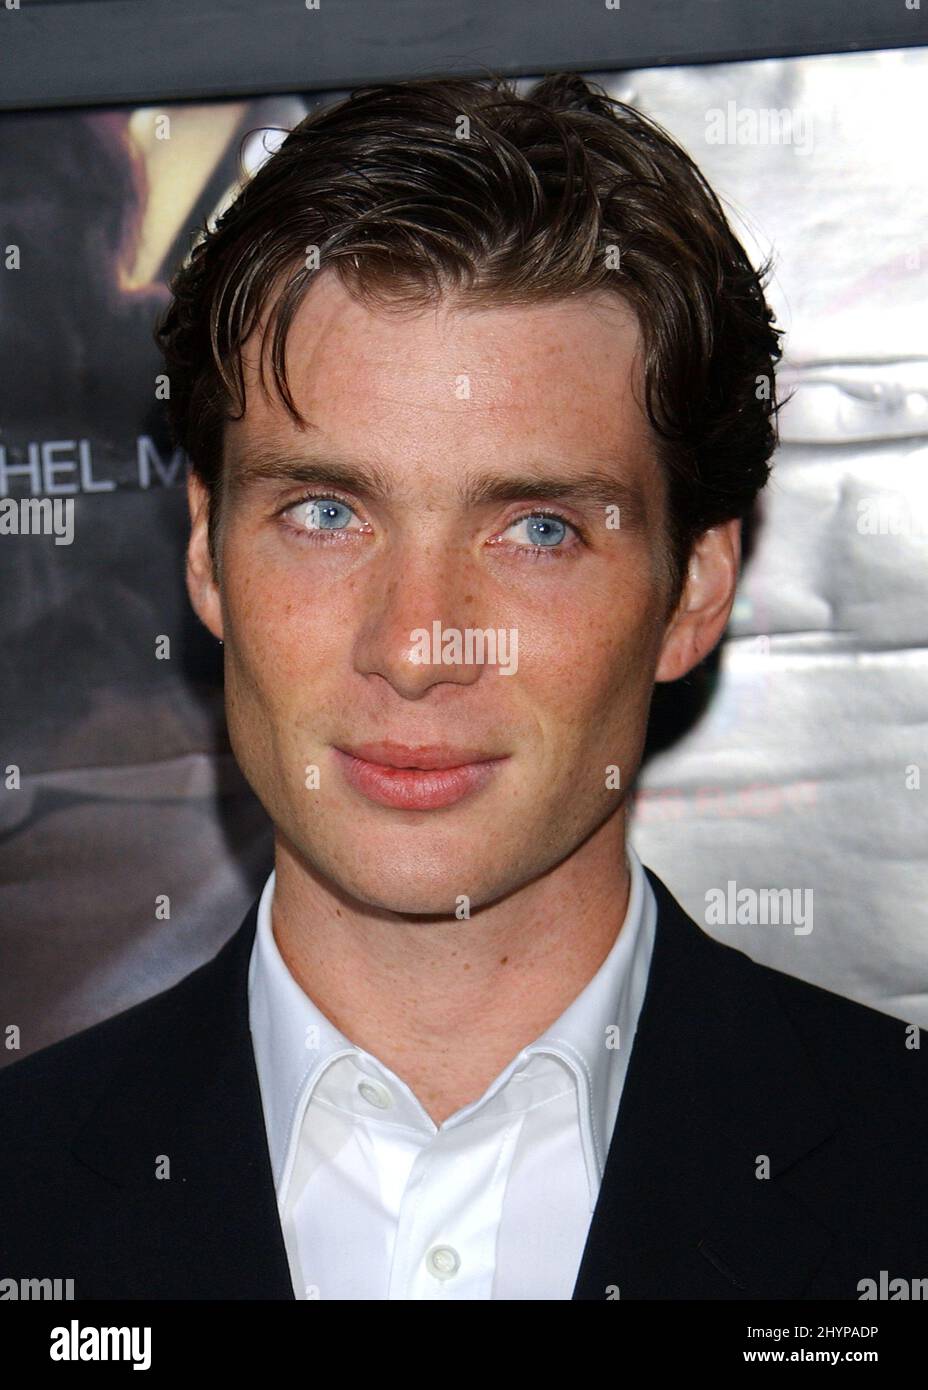 Cillian Murphy attends the 'Red Eye' Los Angeles Premiere. Picture: UK  Press Stock Photo - Alamy